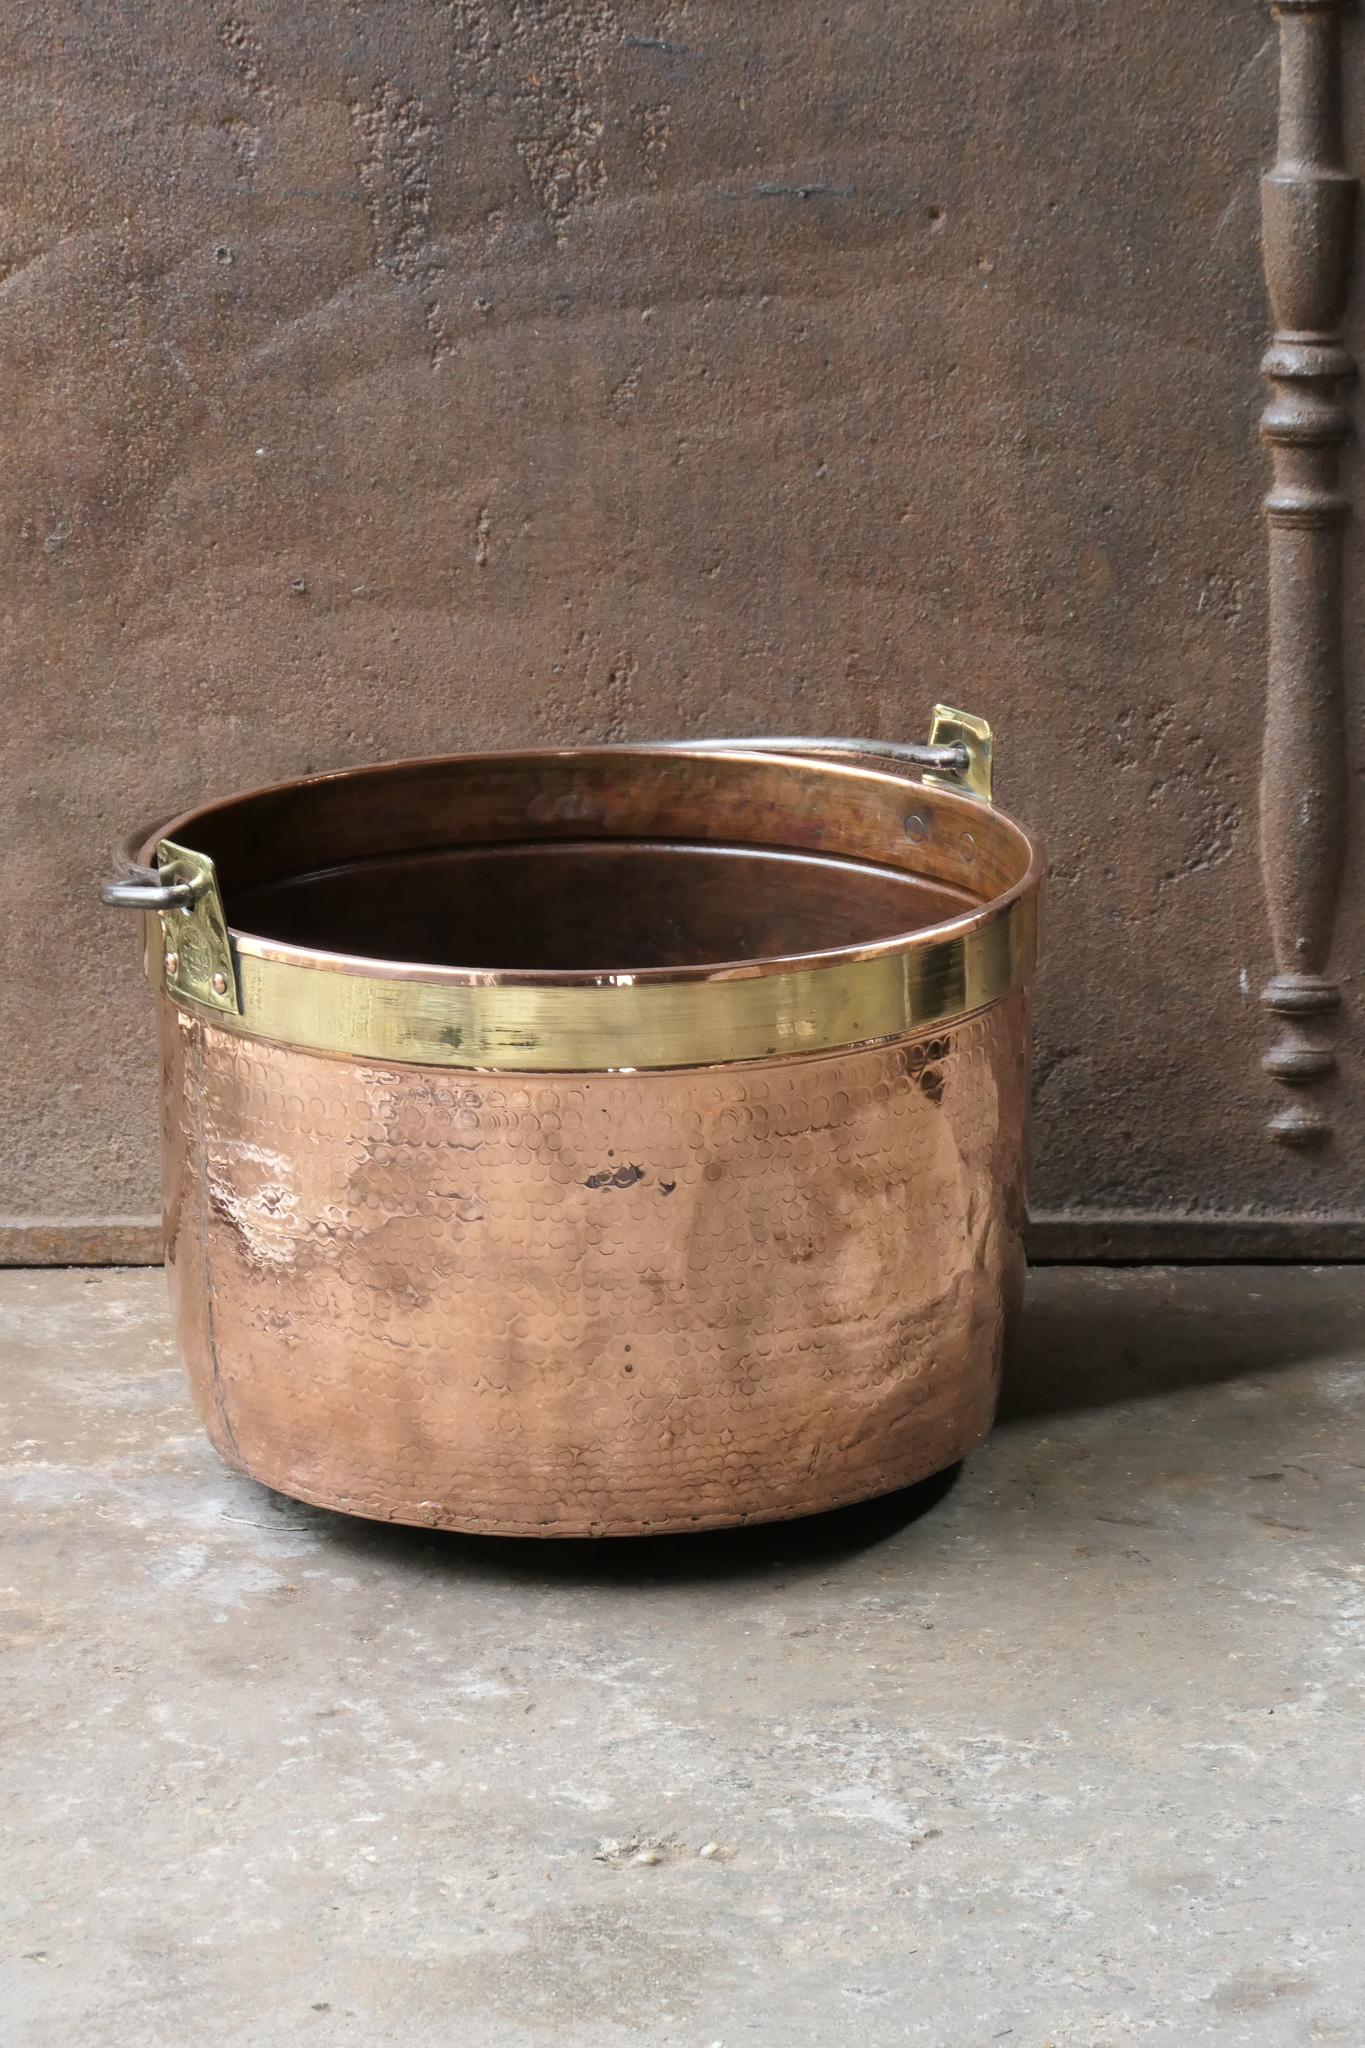 18th - 19th Century Dutch neoclassical log basket. The firewood basket is made of polished copper with a polished brass ring and has a wrought iron handle. Also called 'aker'. Used to draw water from the well and cook over an open fire.

The log